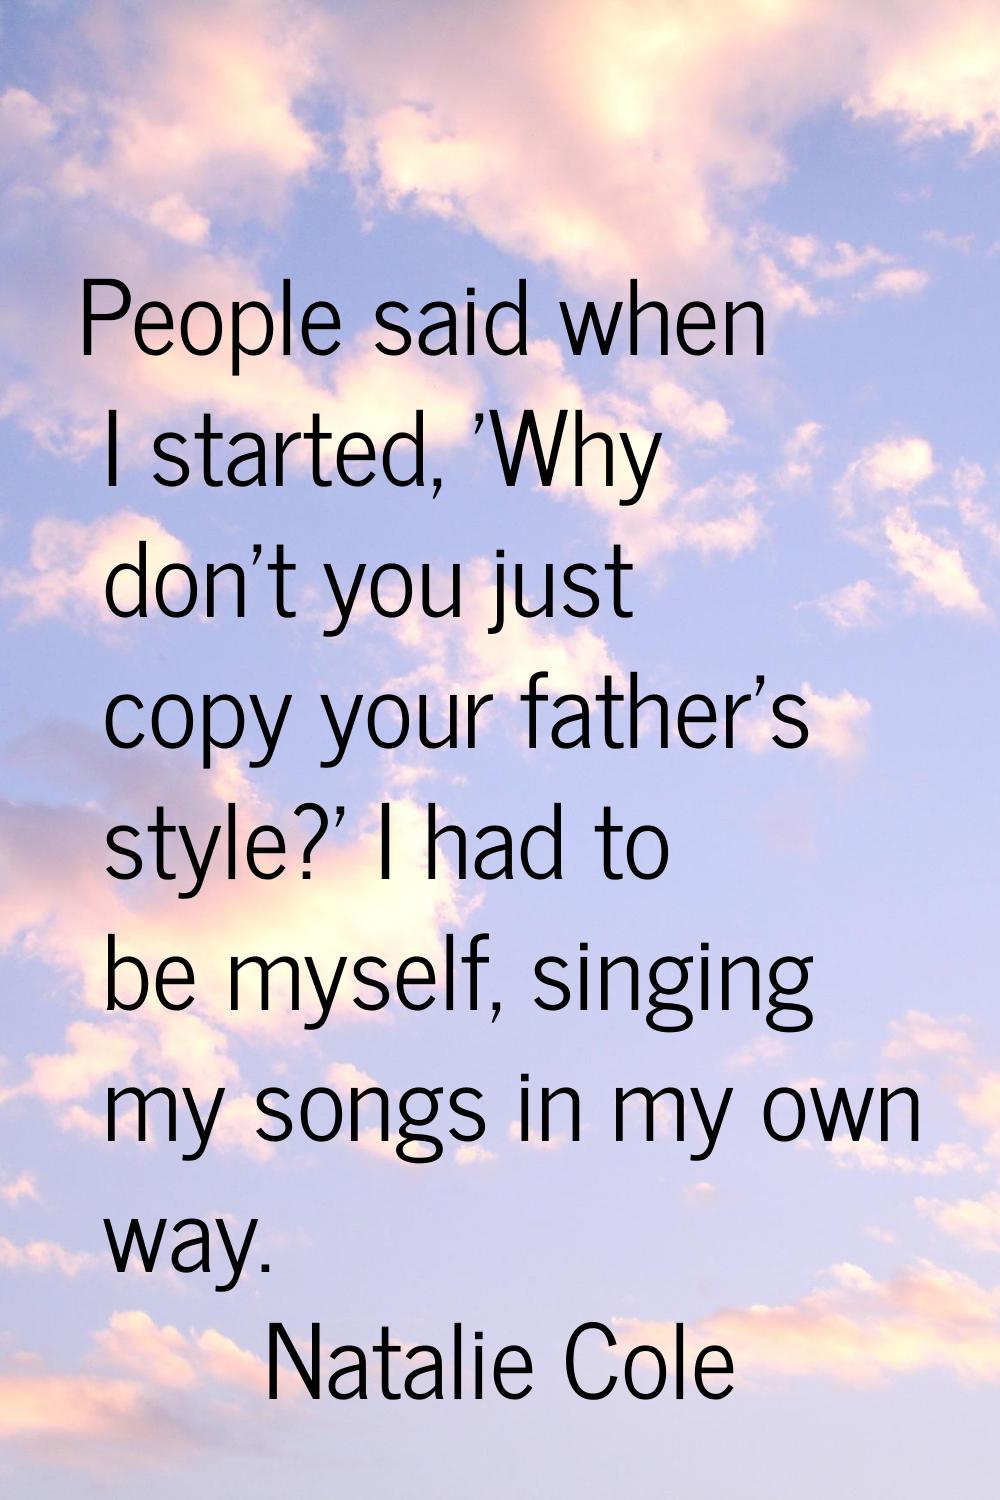 People said when I started, 'Why don't you just copy your father's style?' I had to be myself, sing